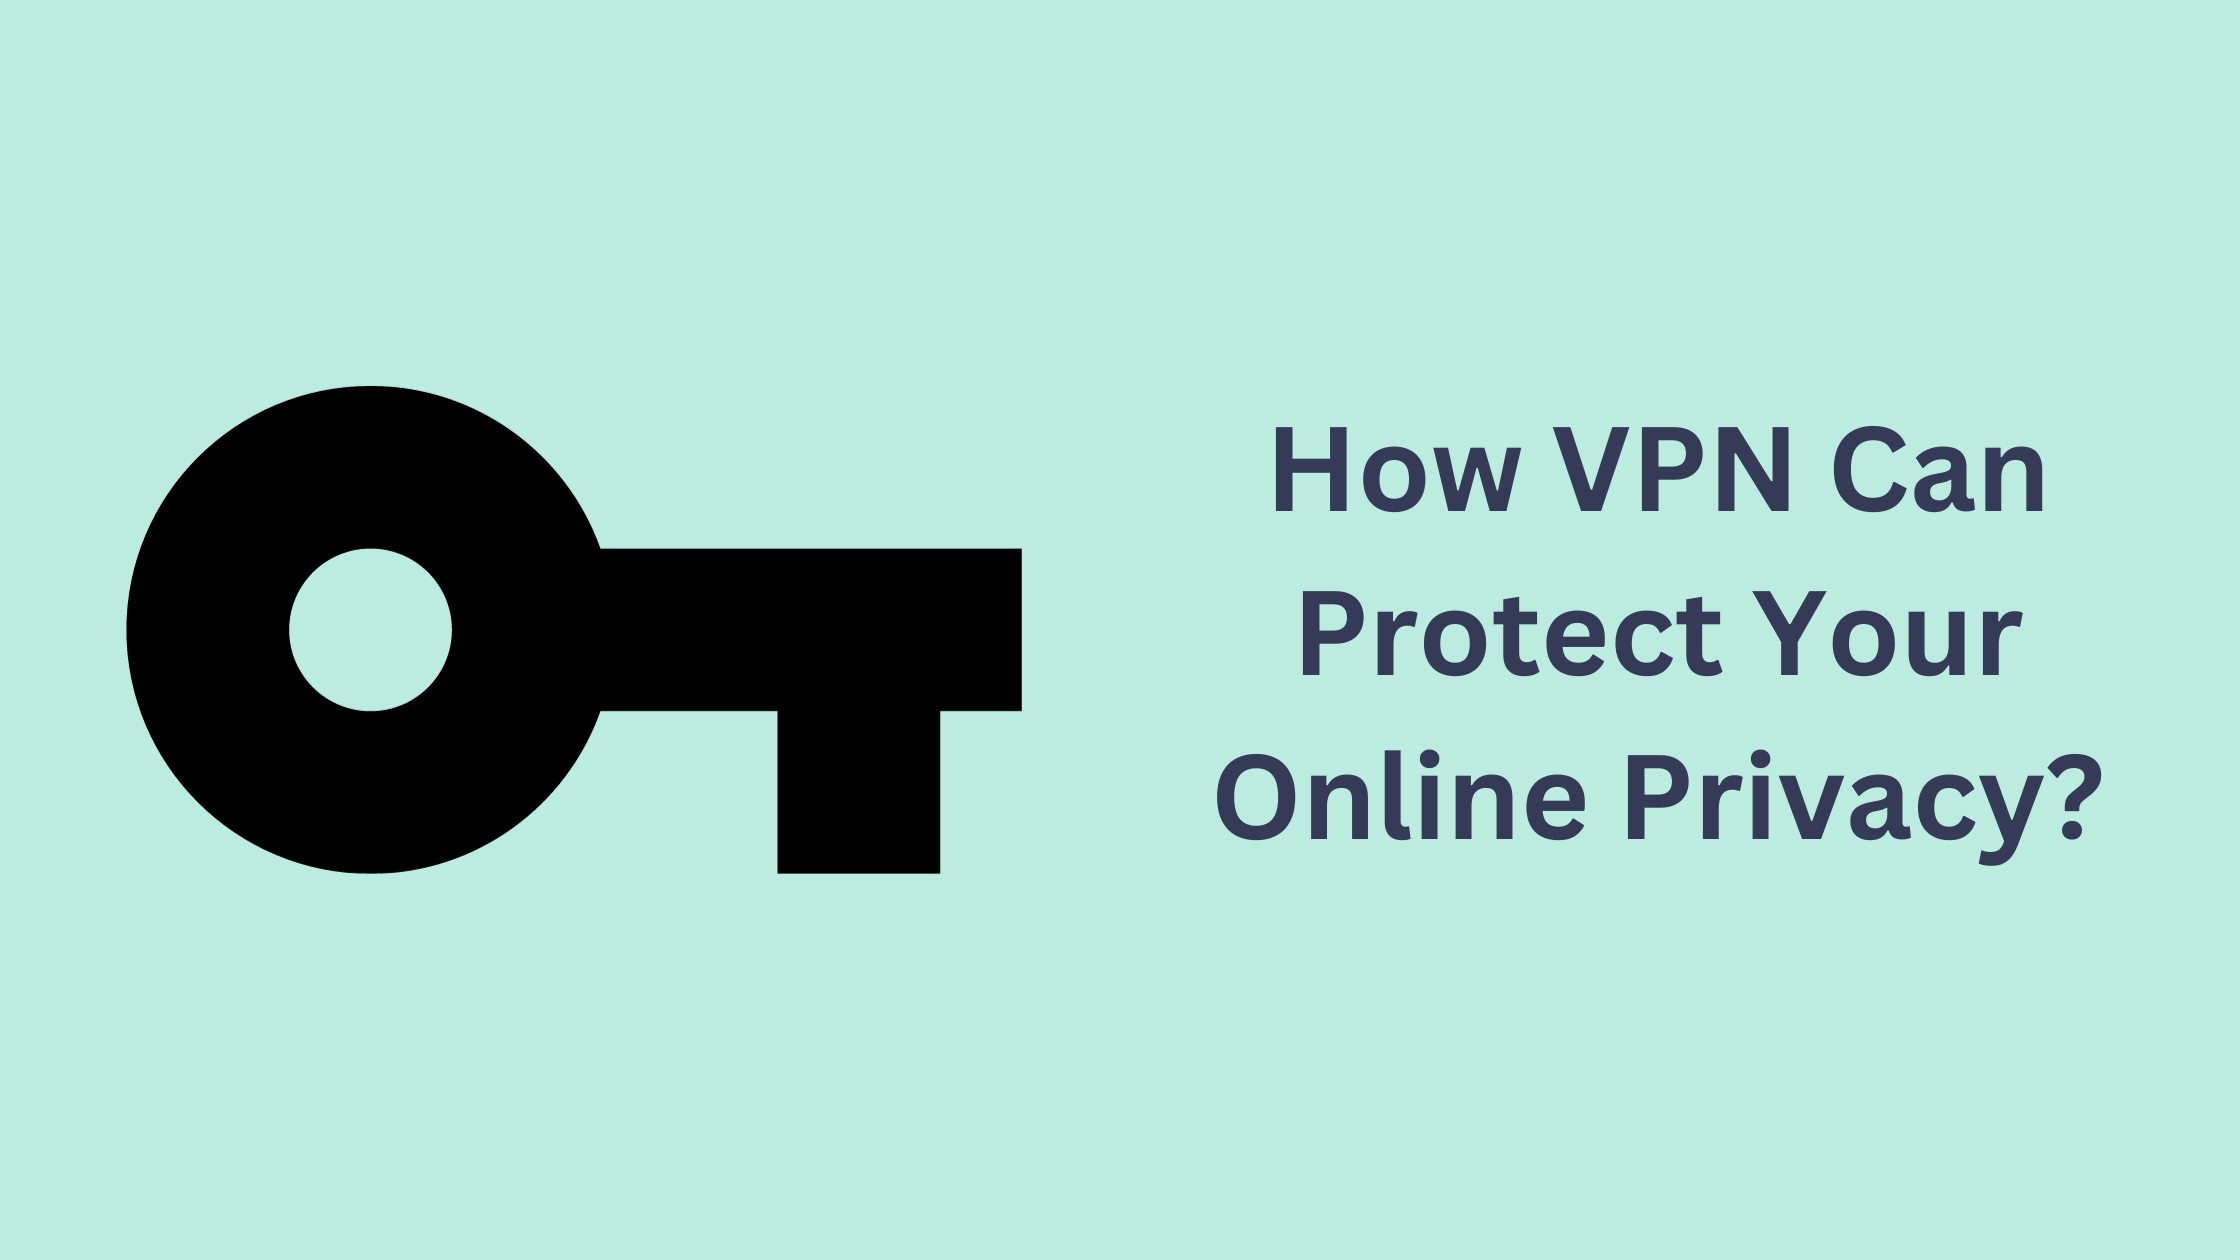 How VPN Can Protect Your Online Privacy?